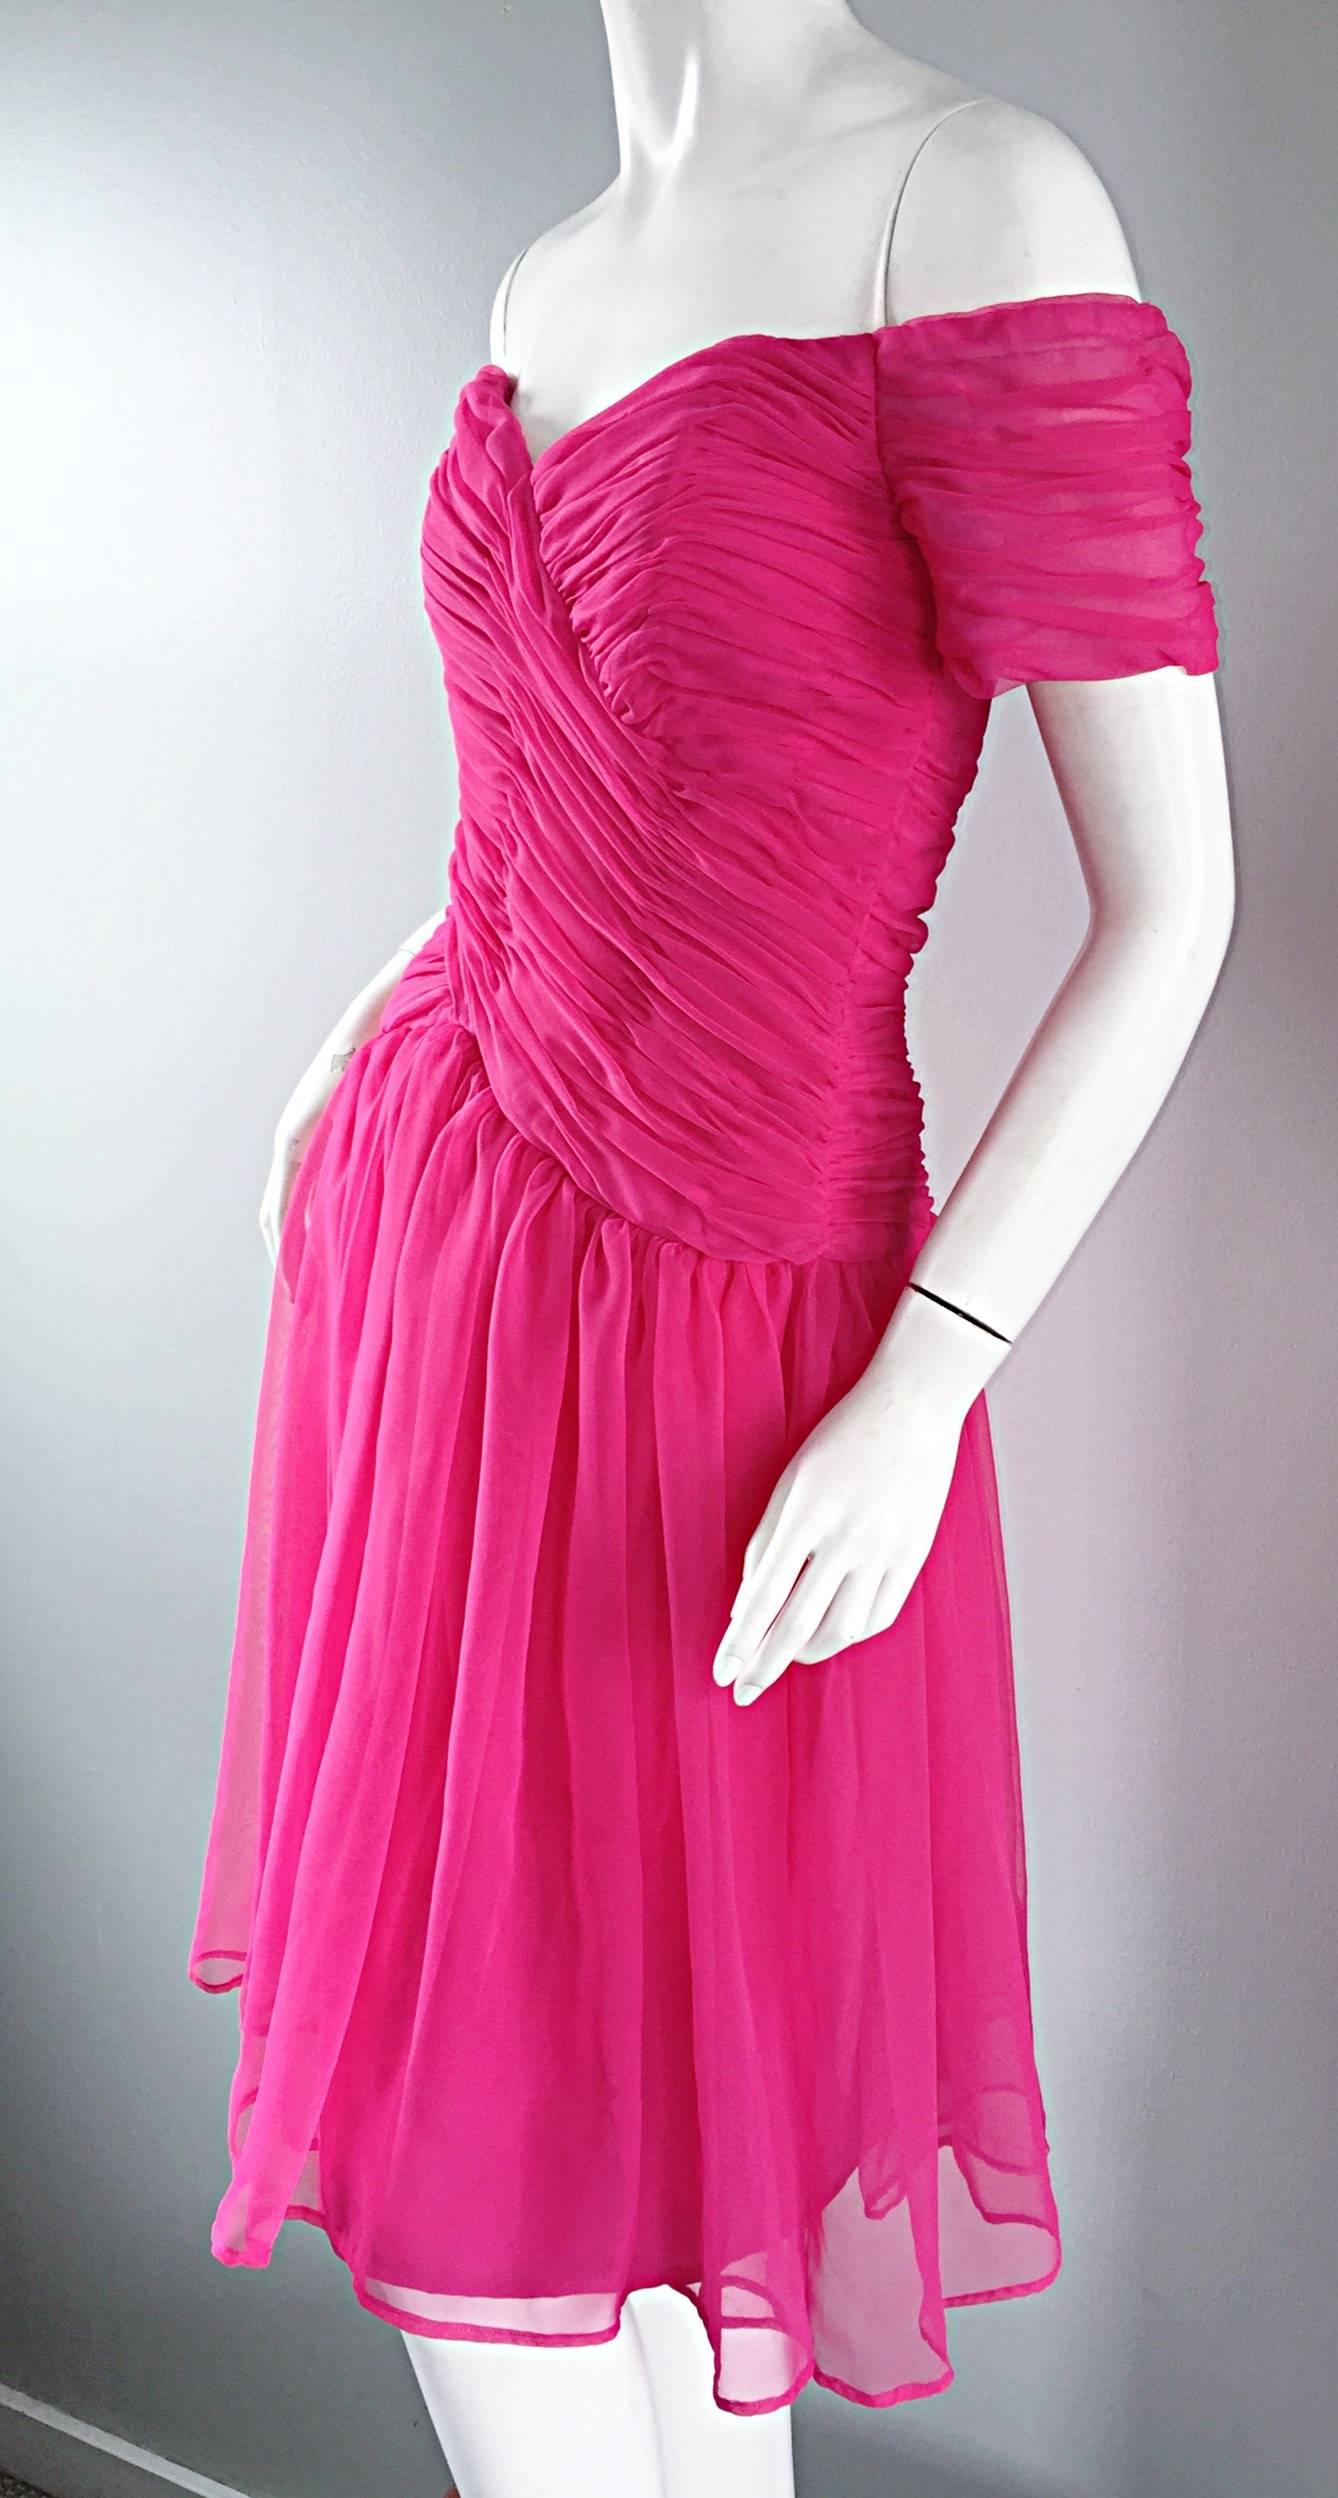 Victor Costa 80s Bergdorf Goodman Vintage Hot Pink Chiffon Off - Shoulder Dress In Excellent Condition For Sale In San Diego, CA